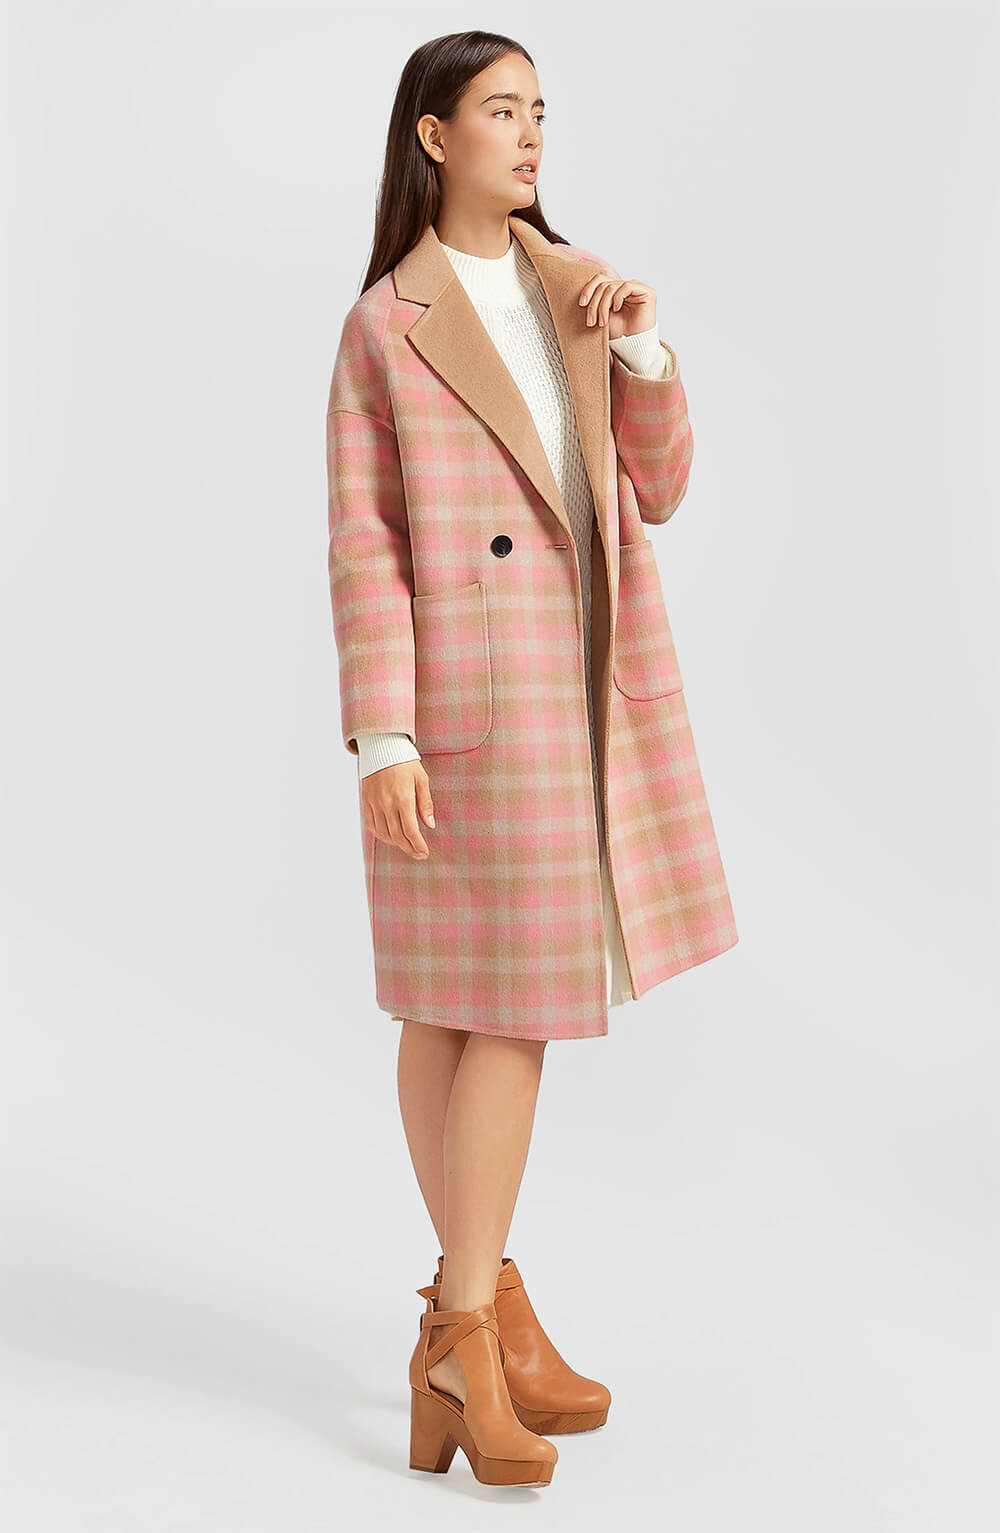 pink and tan plaid coat by belle and bloom